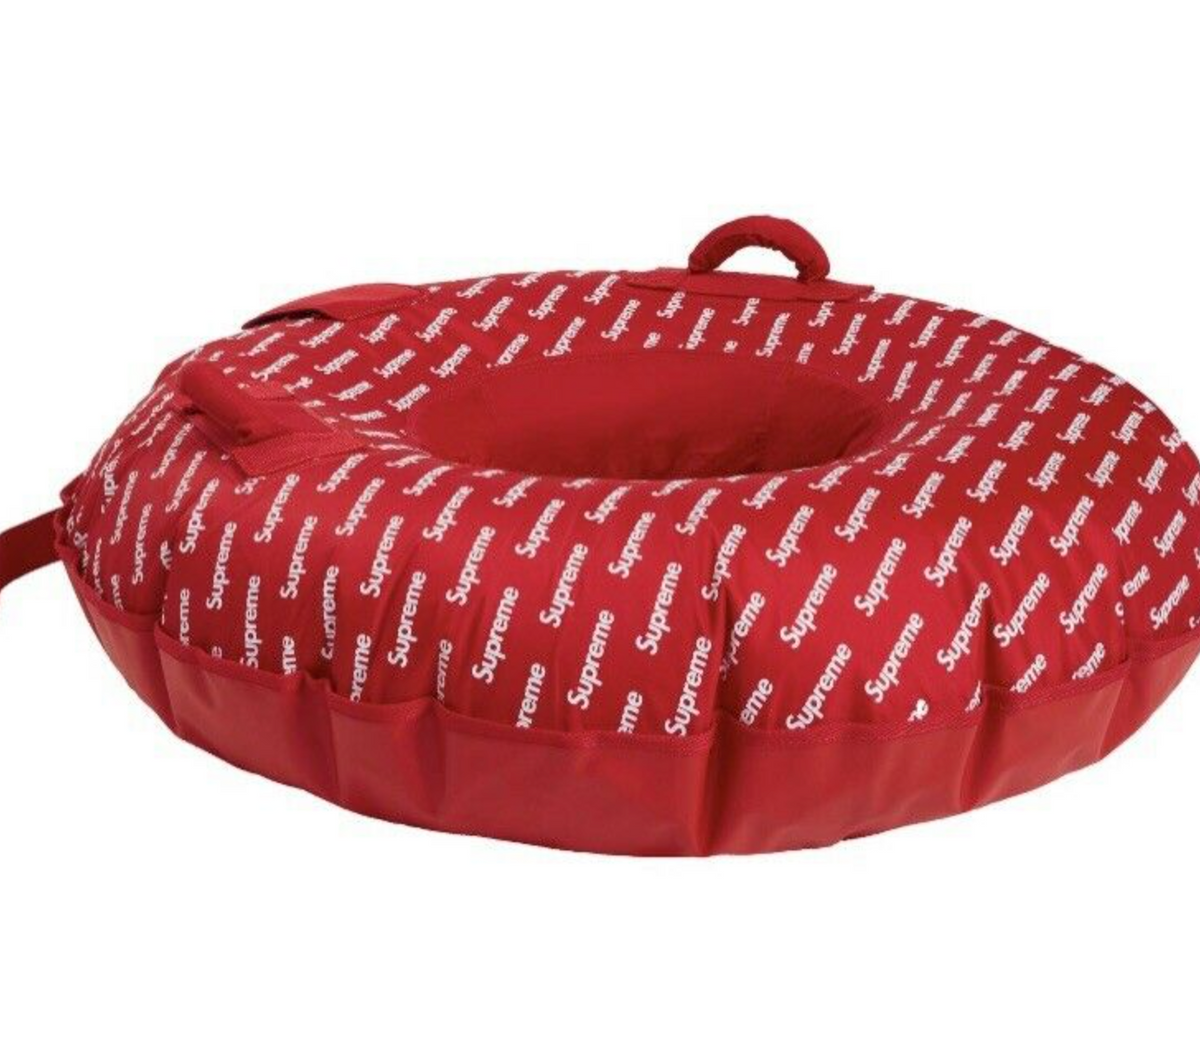 New arrival - Supreme Snow Tube Size: One Size Color: Red